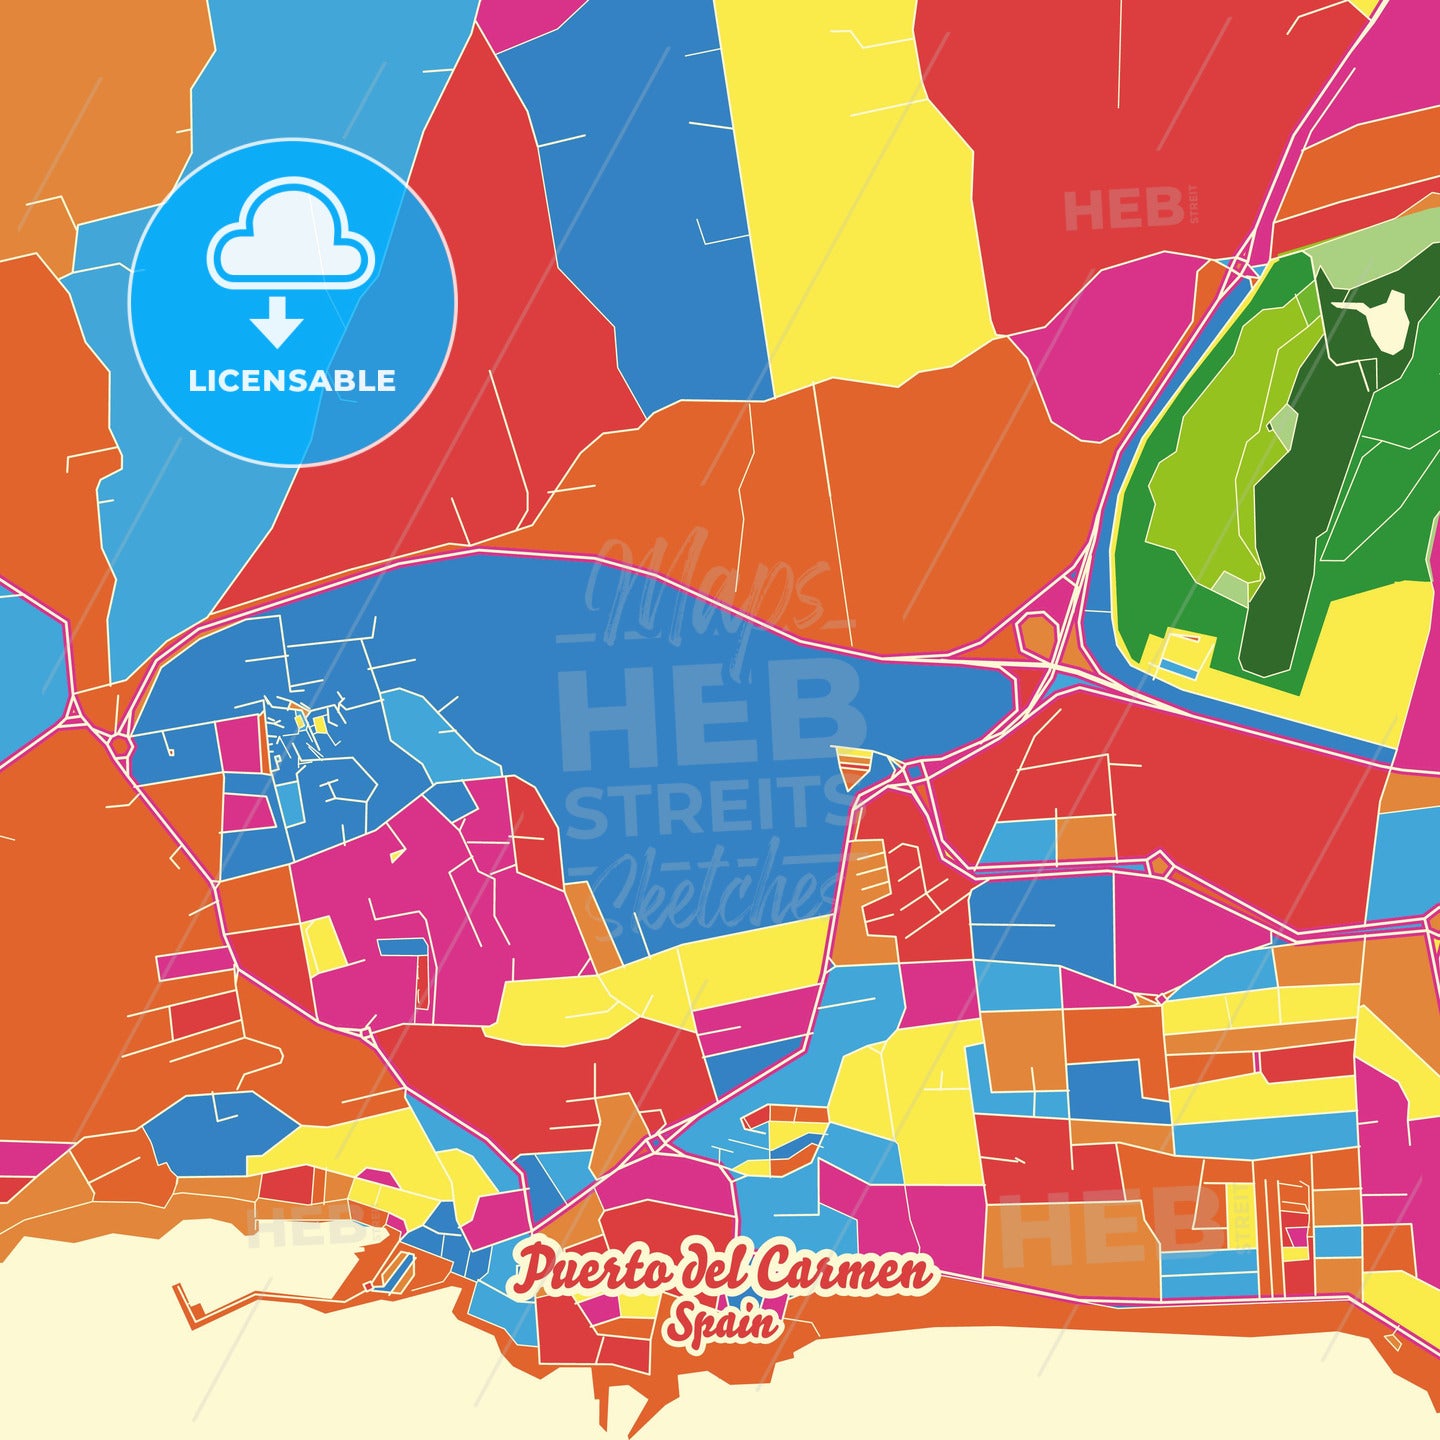 Puerto del Carmen, Spain Crazy Colorful Street Map Poster Template - HEBSTREITS Sketches